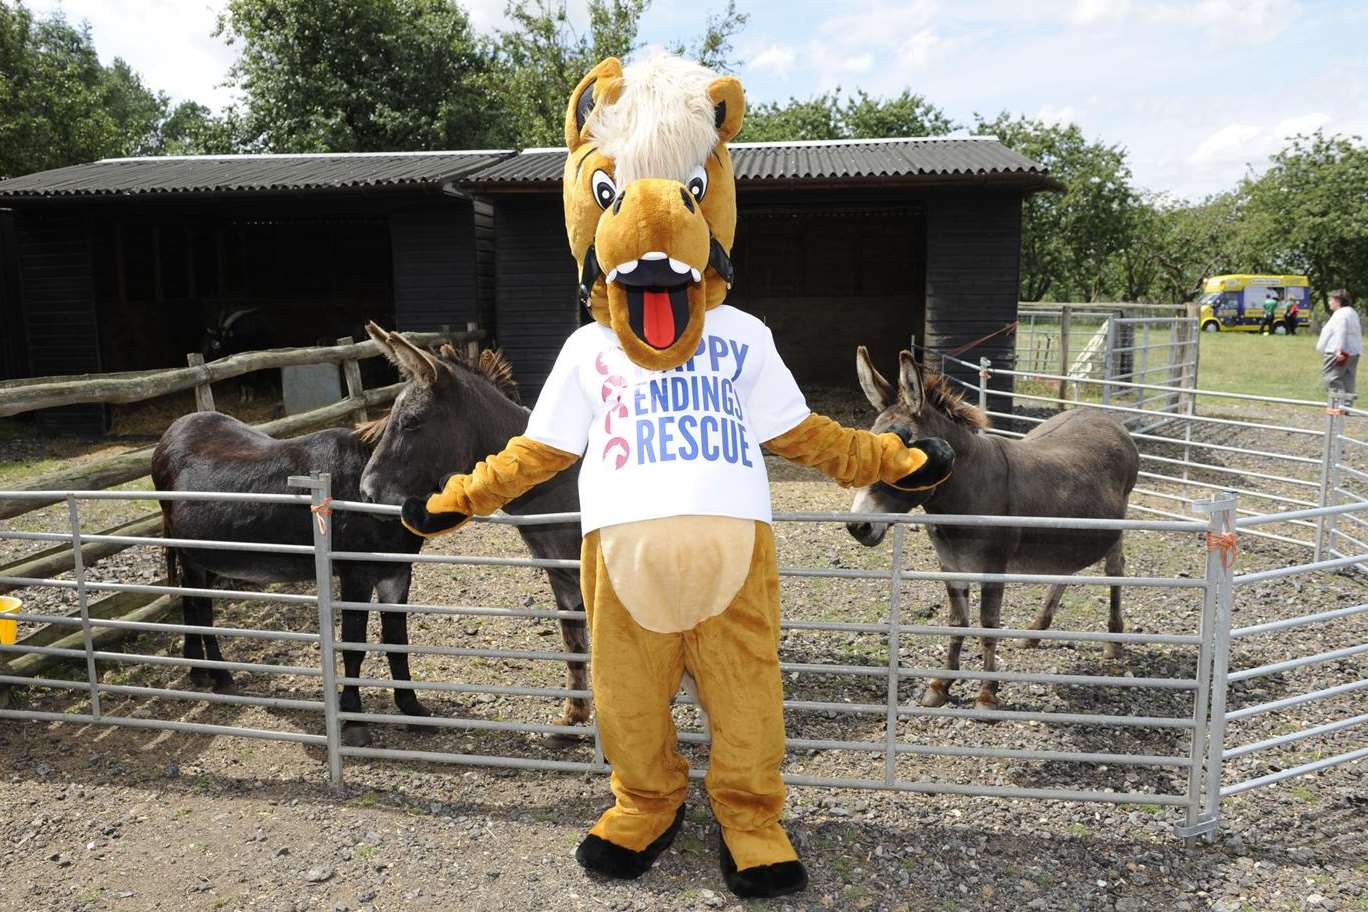 The Happy Endings Rescue mascot at the fun day on Sunday where Picasso was stolen